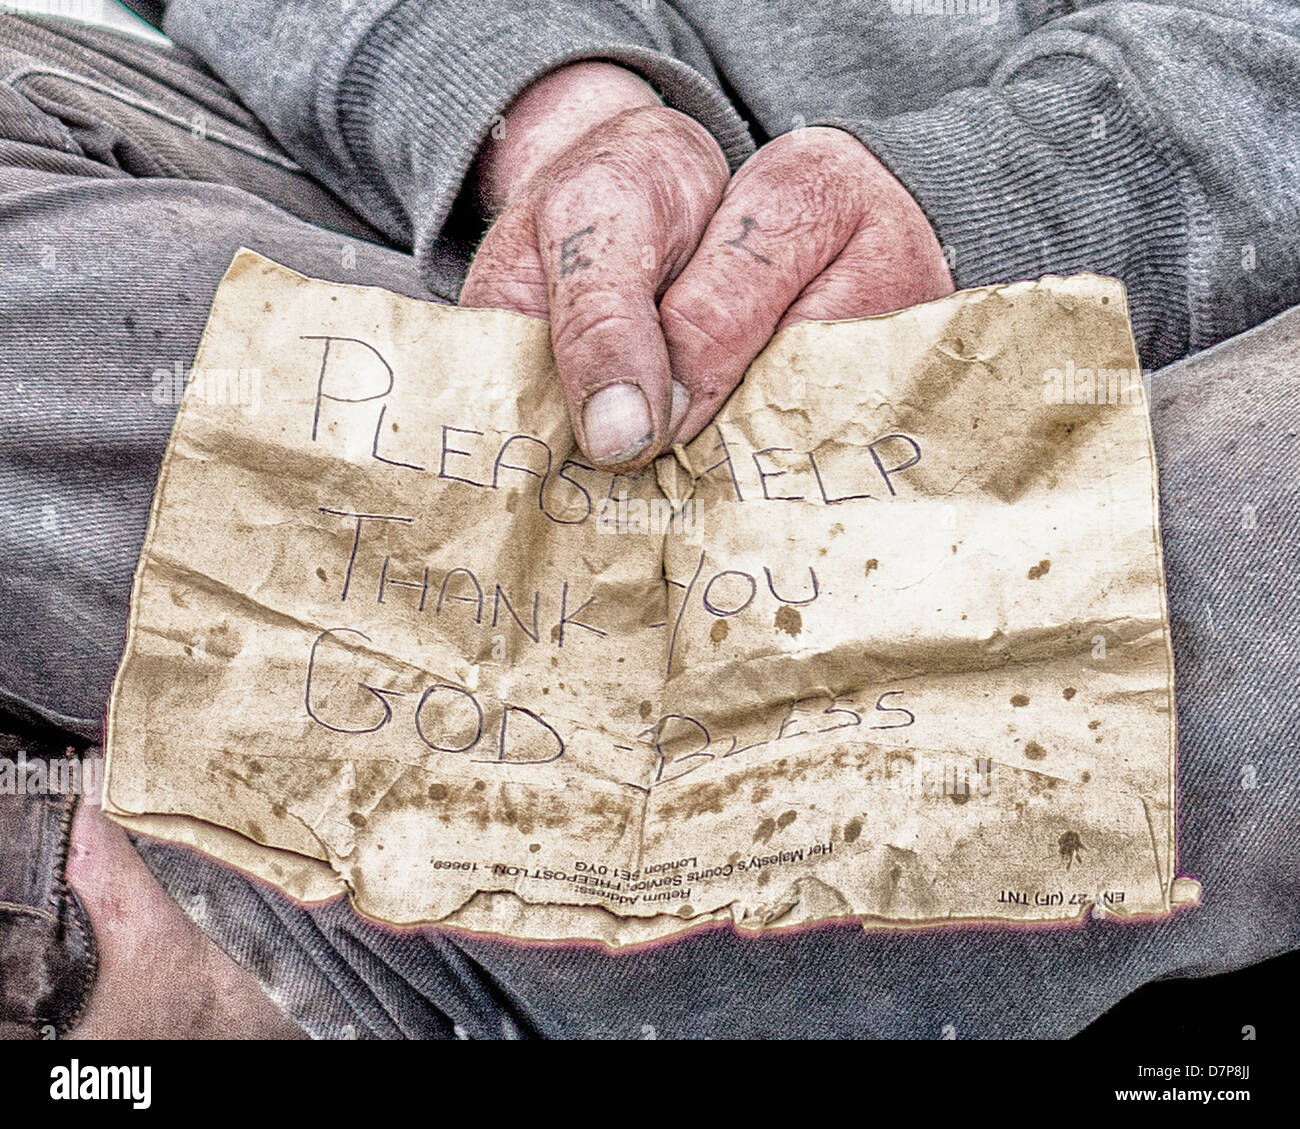 A homeless man begging in London asks for help via a message written on the back of a brown envelope. Stock Photo